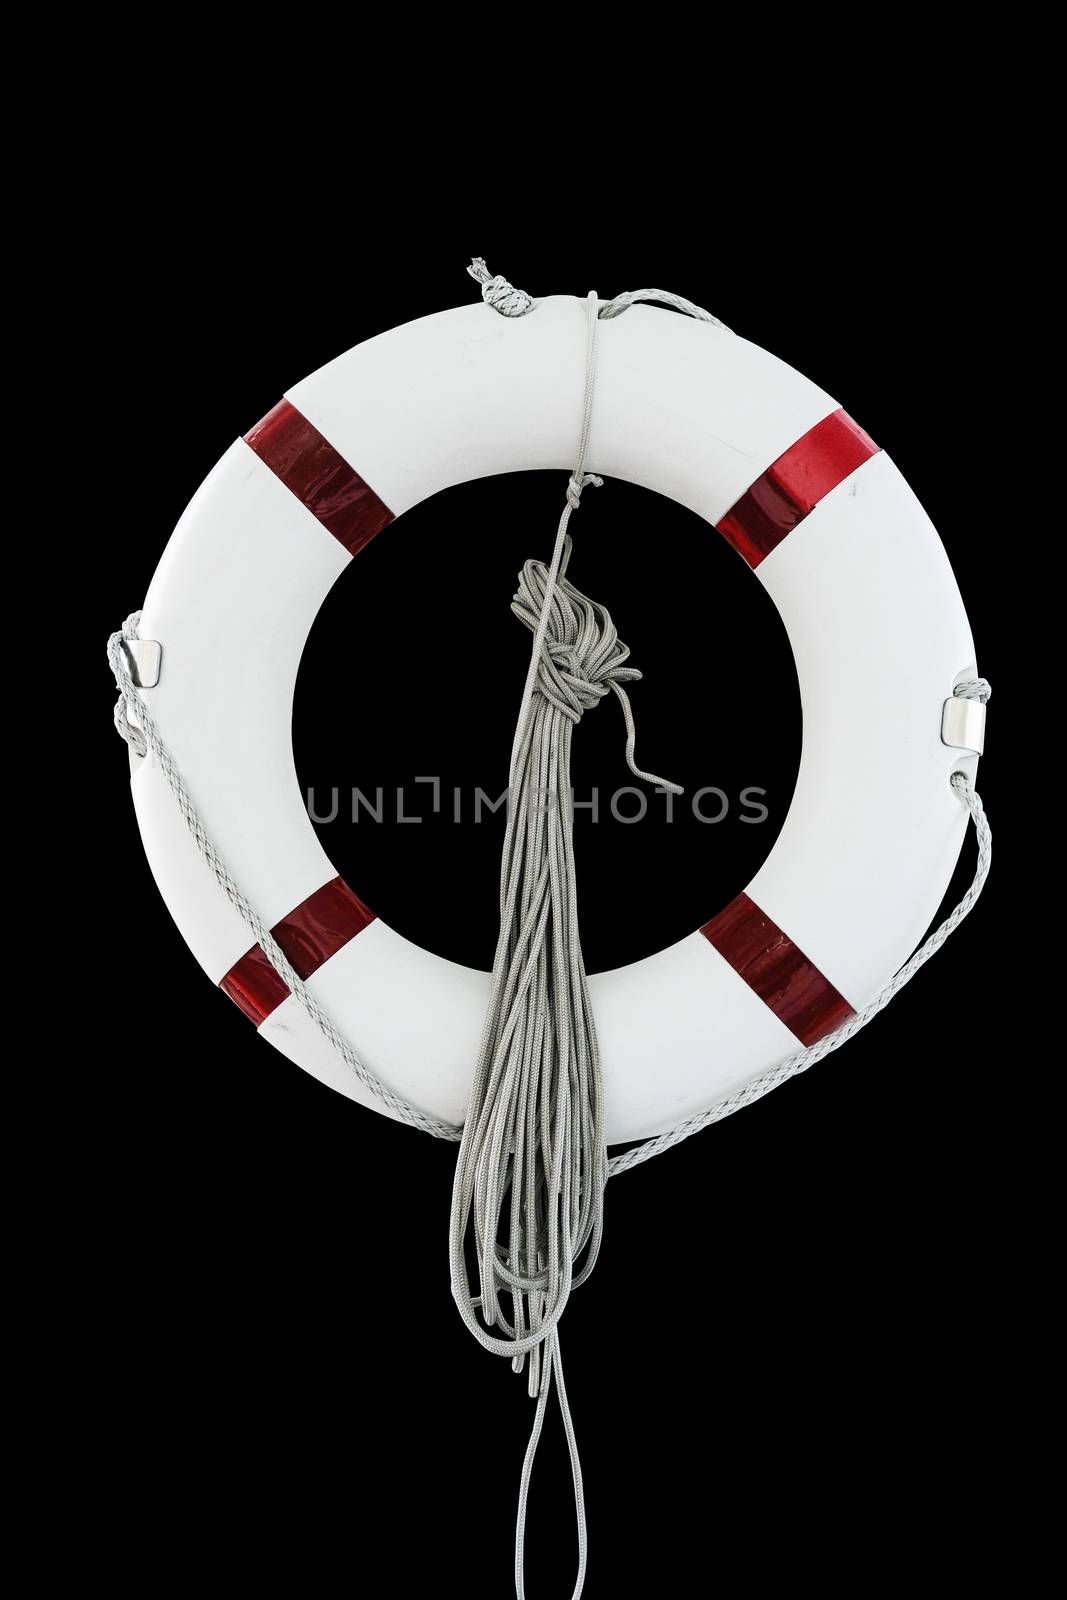 Life buoy in black background with clipping path